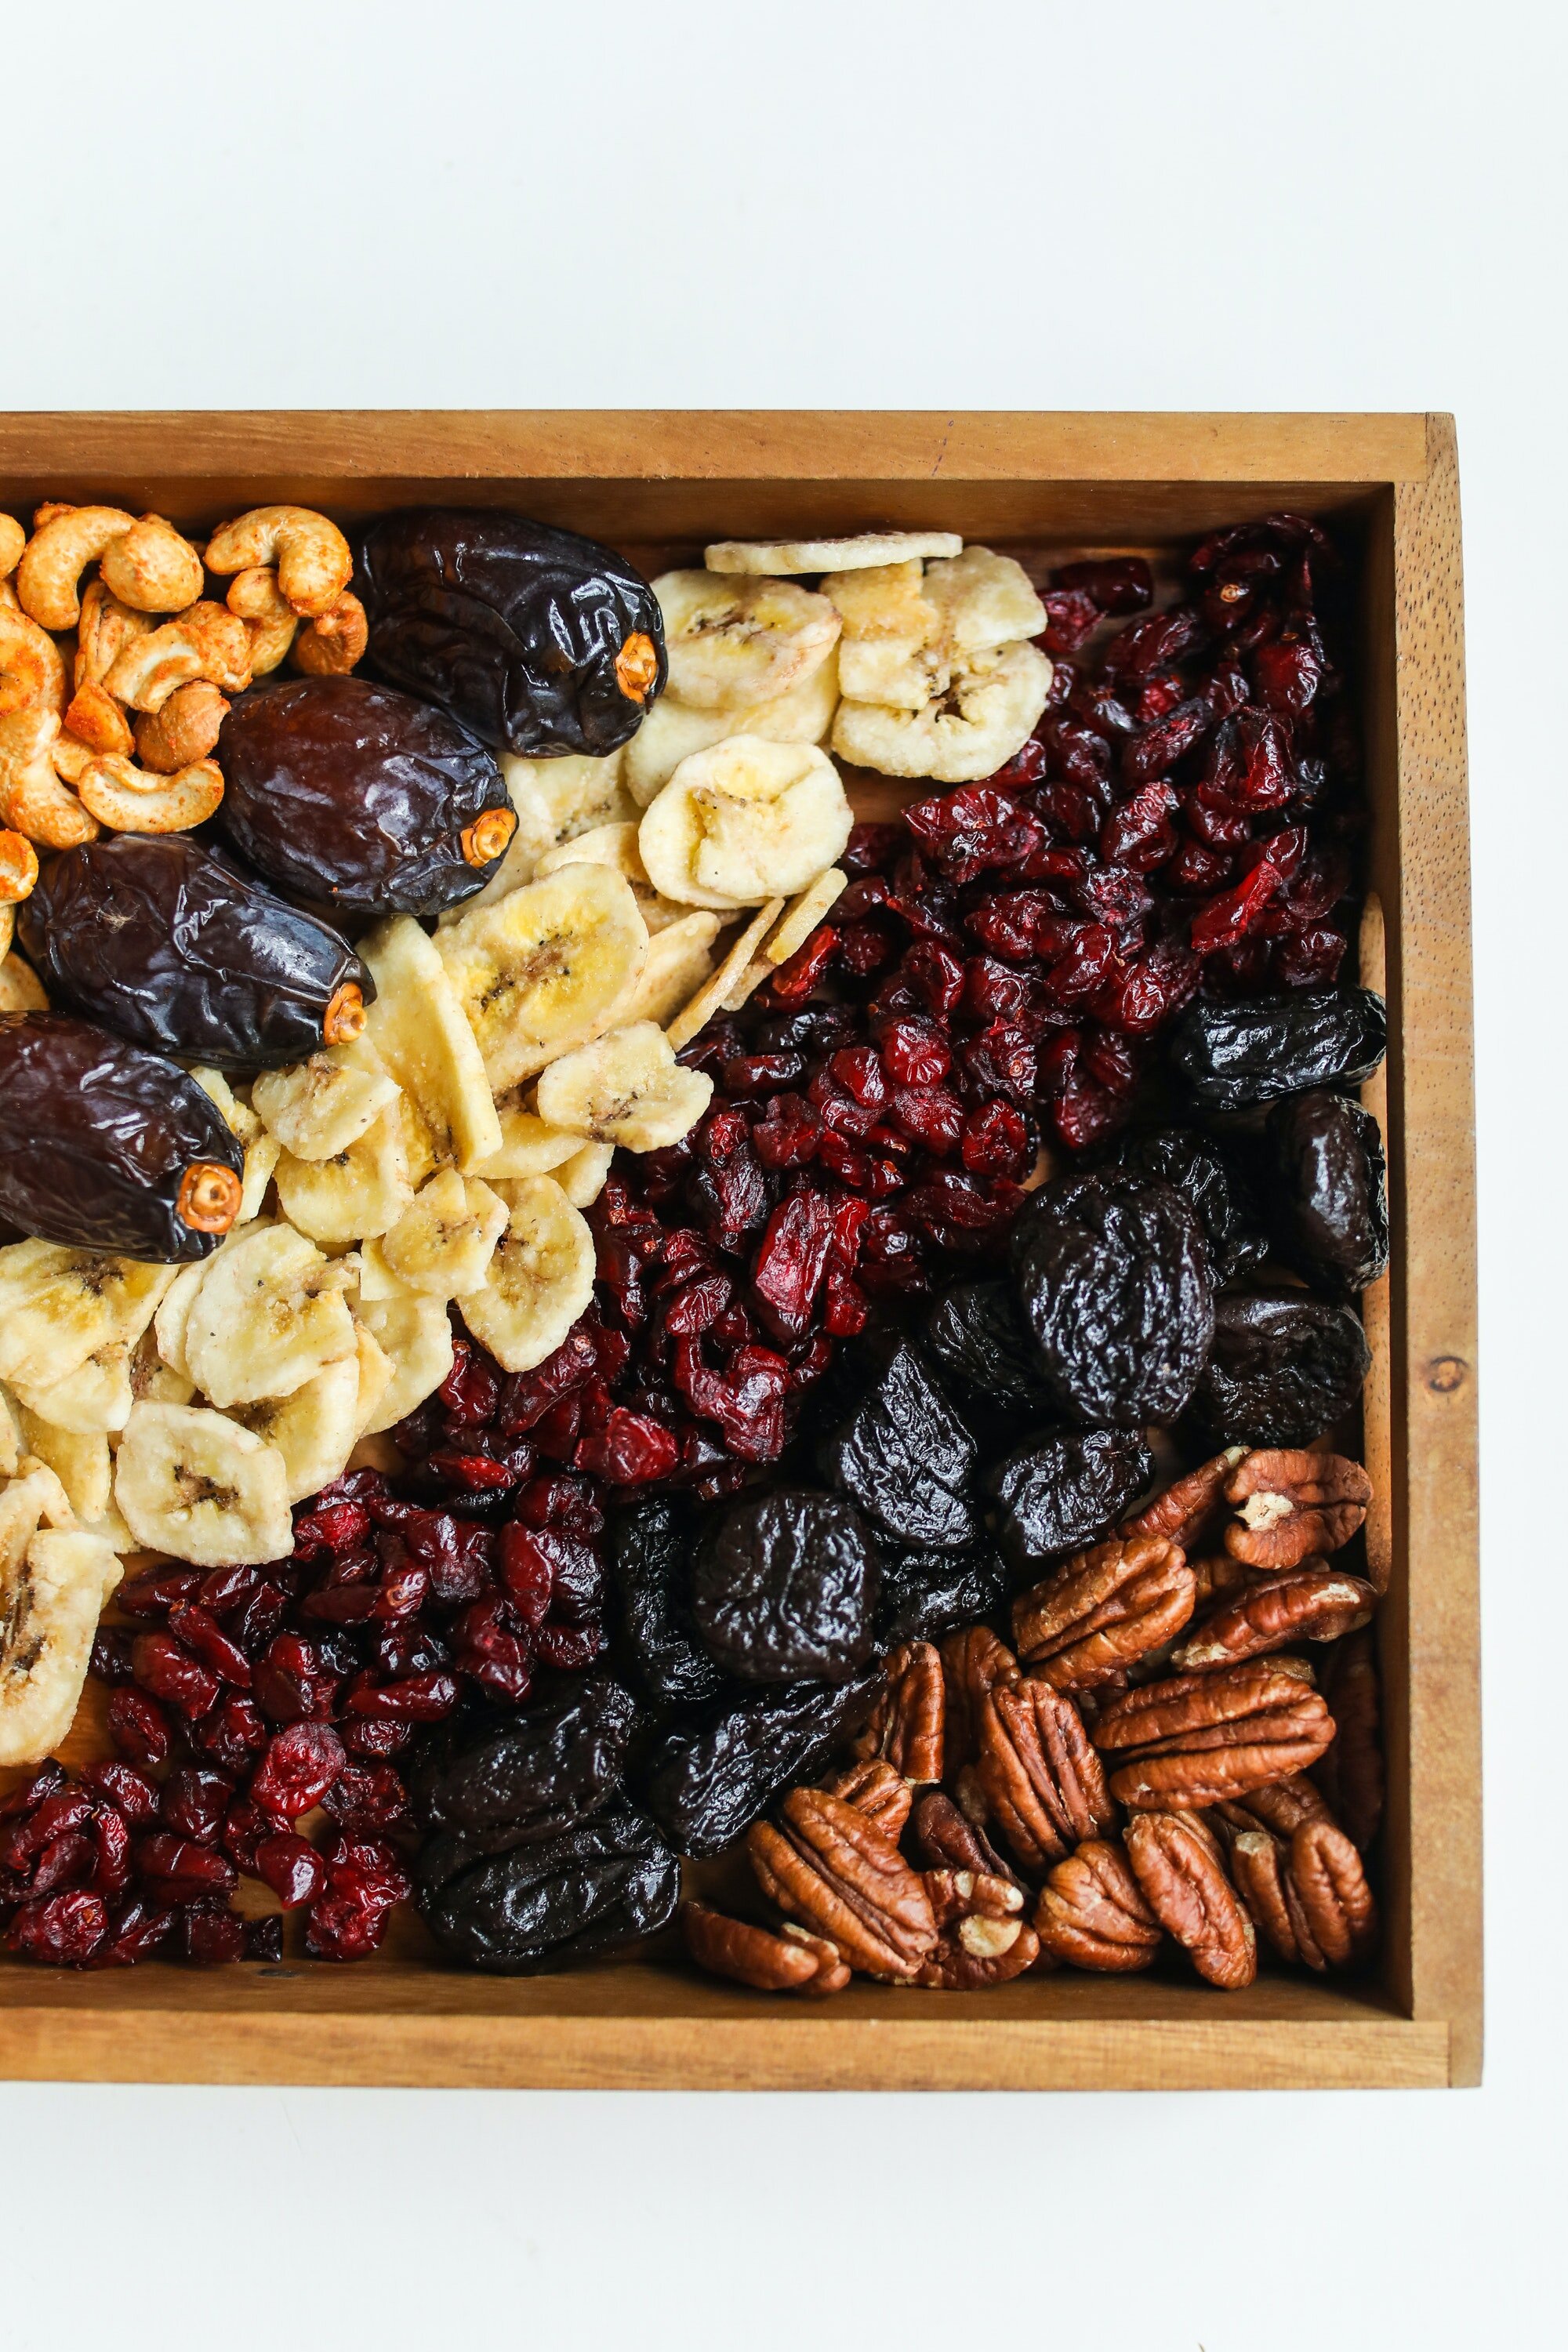 photo-of-assorted-fruits-on-wooden-tray-3872416.jpg